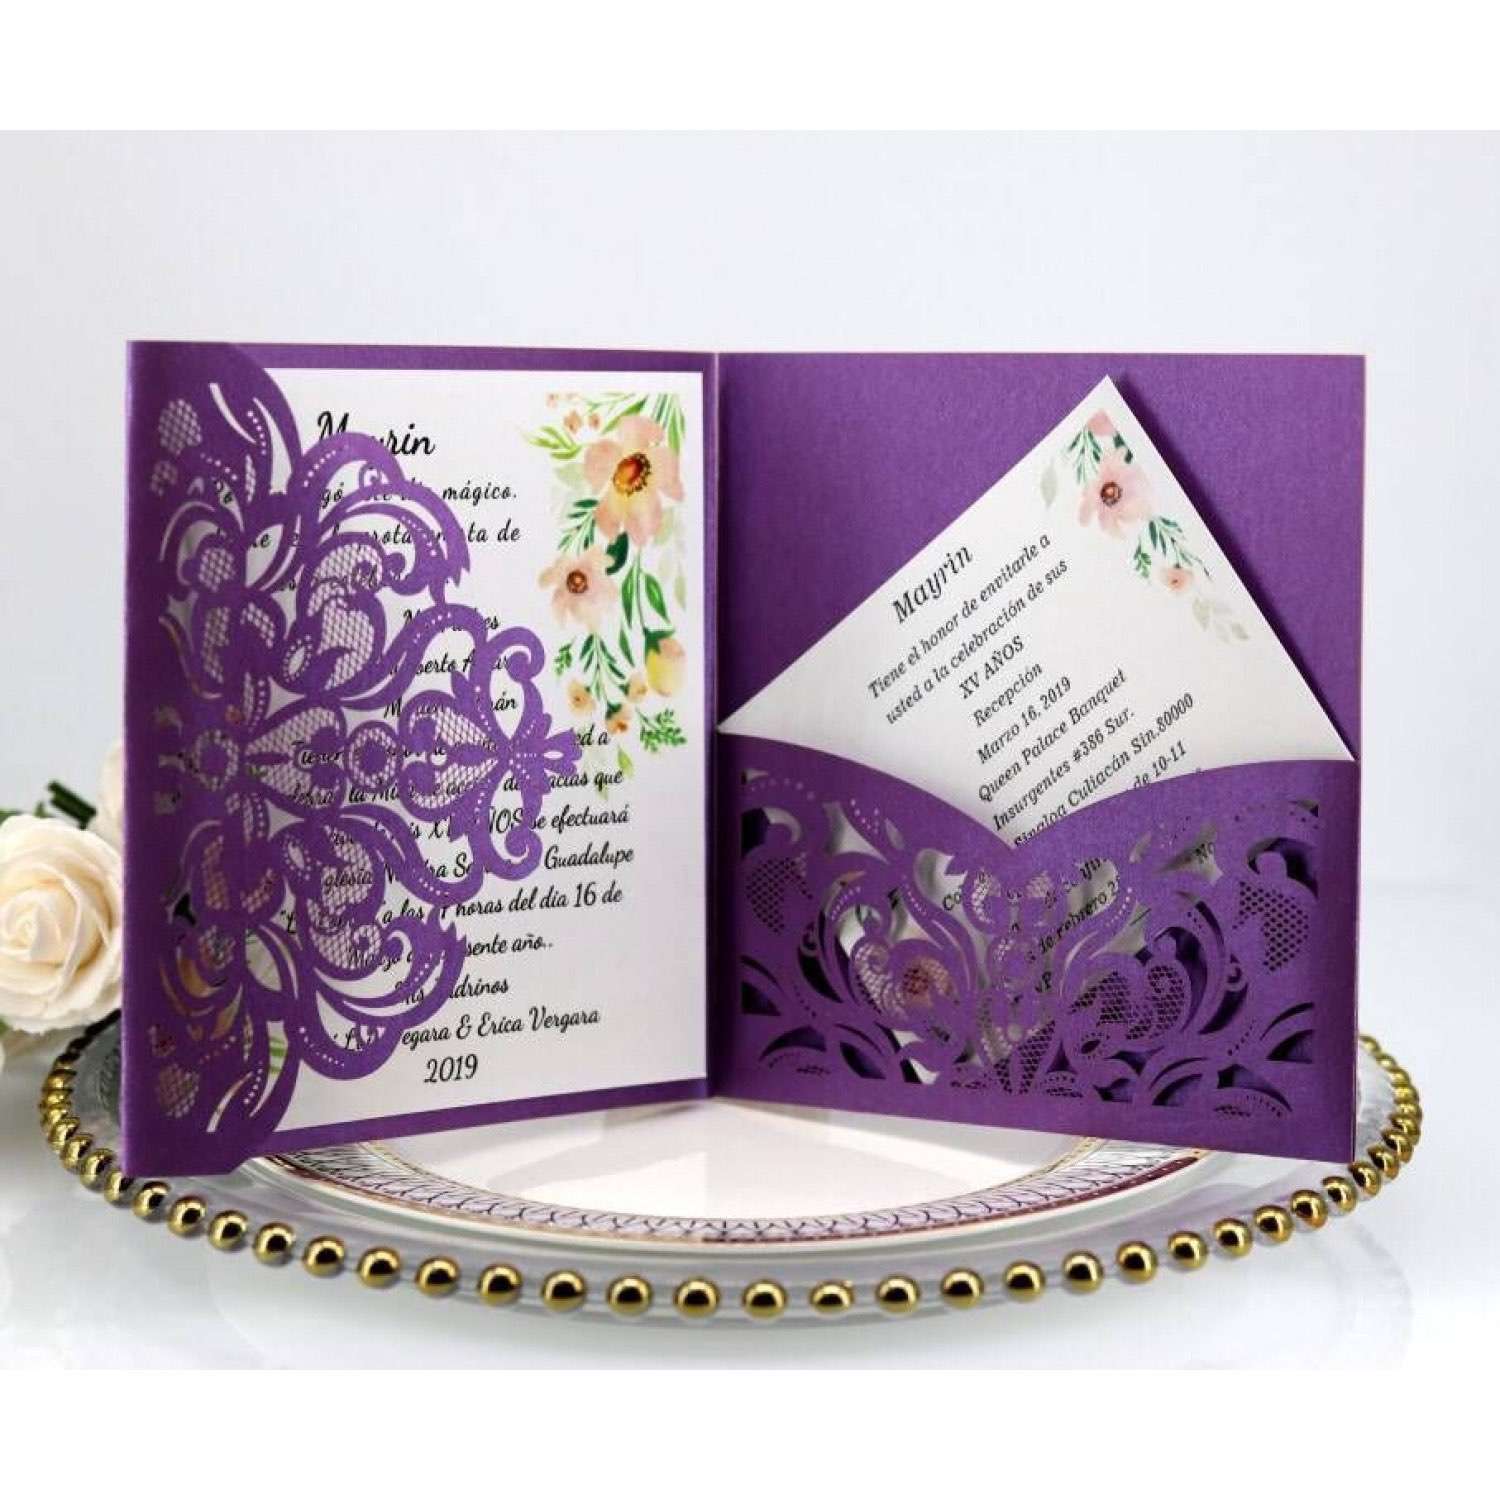 Iridescent Invitation Card Thank You Card With Envelope New Wedding Invitation